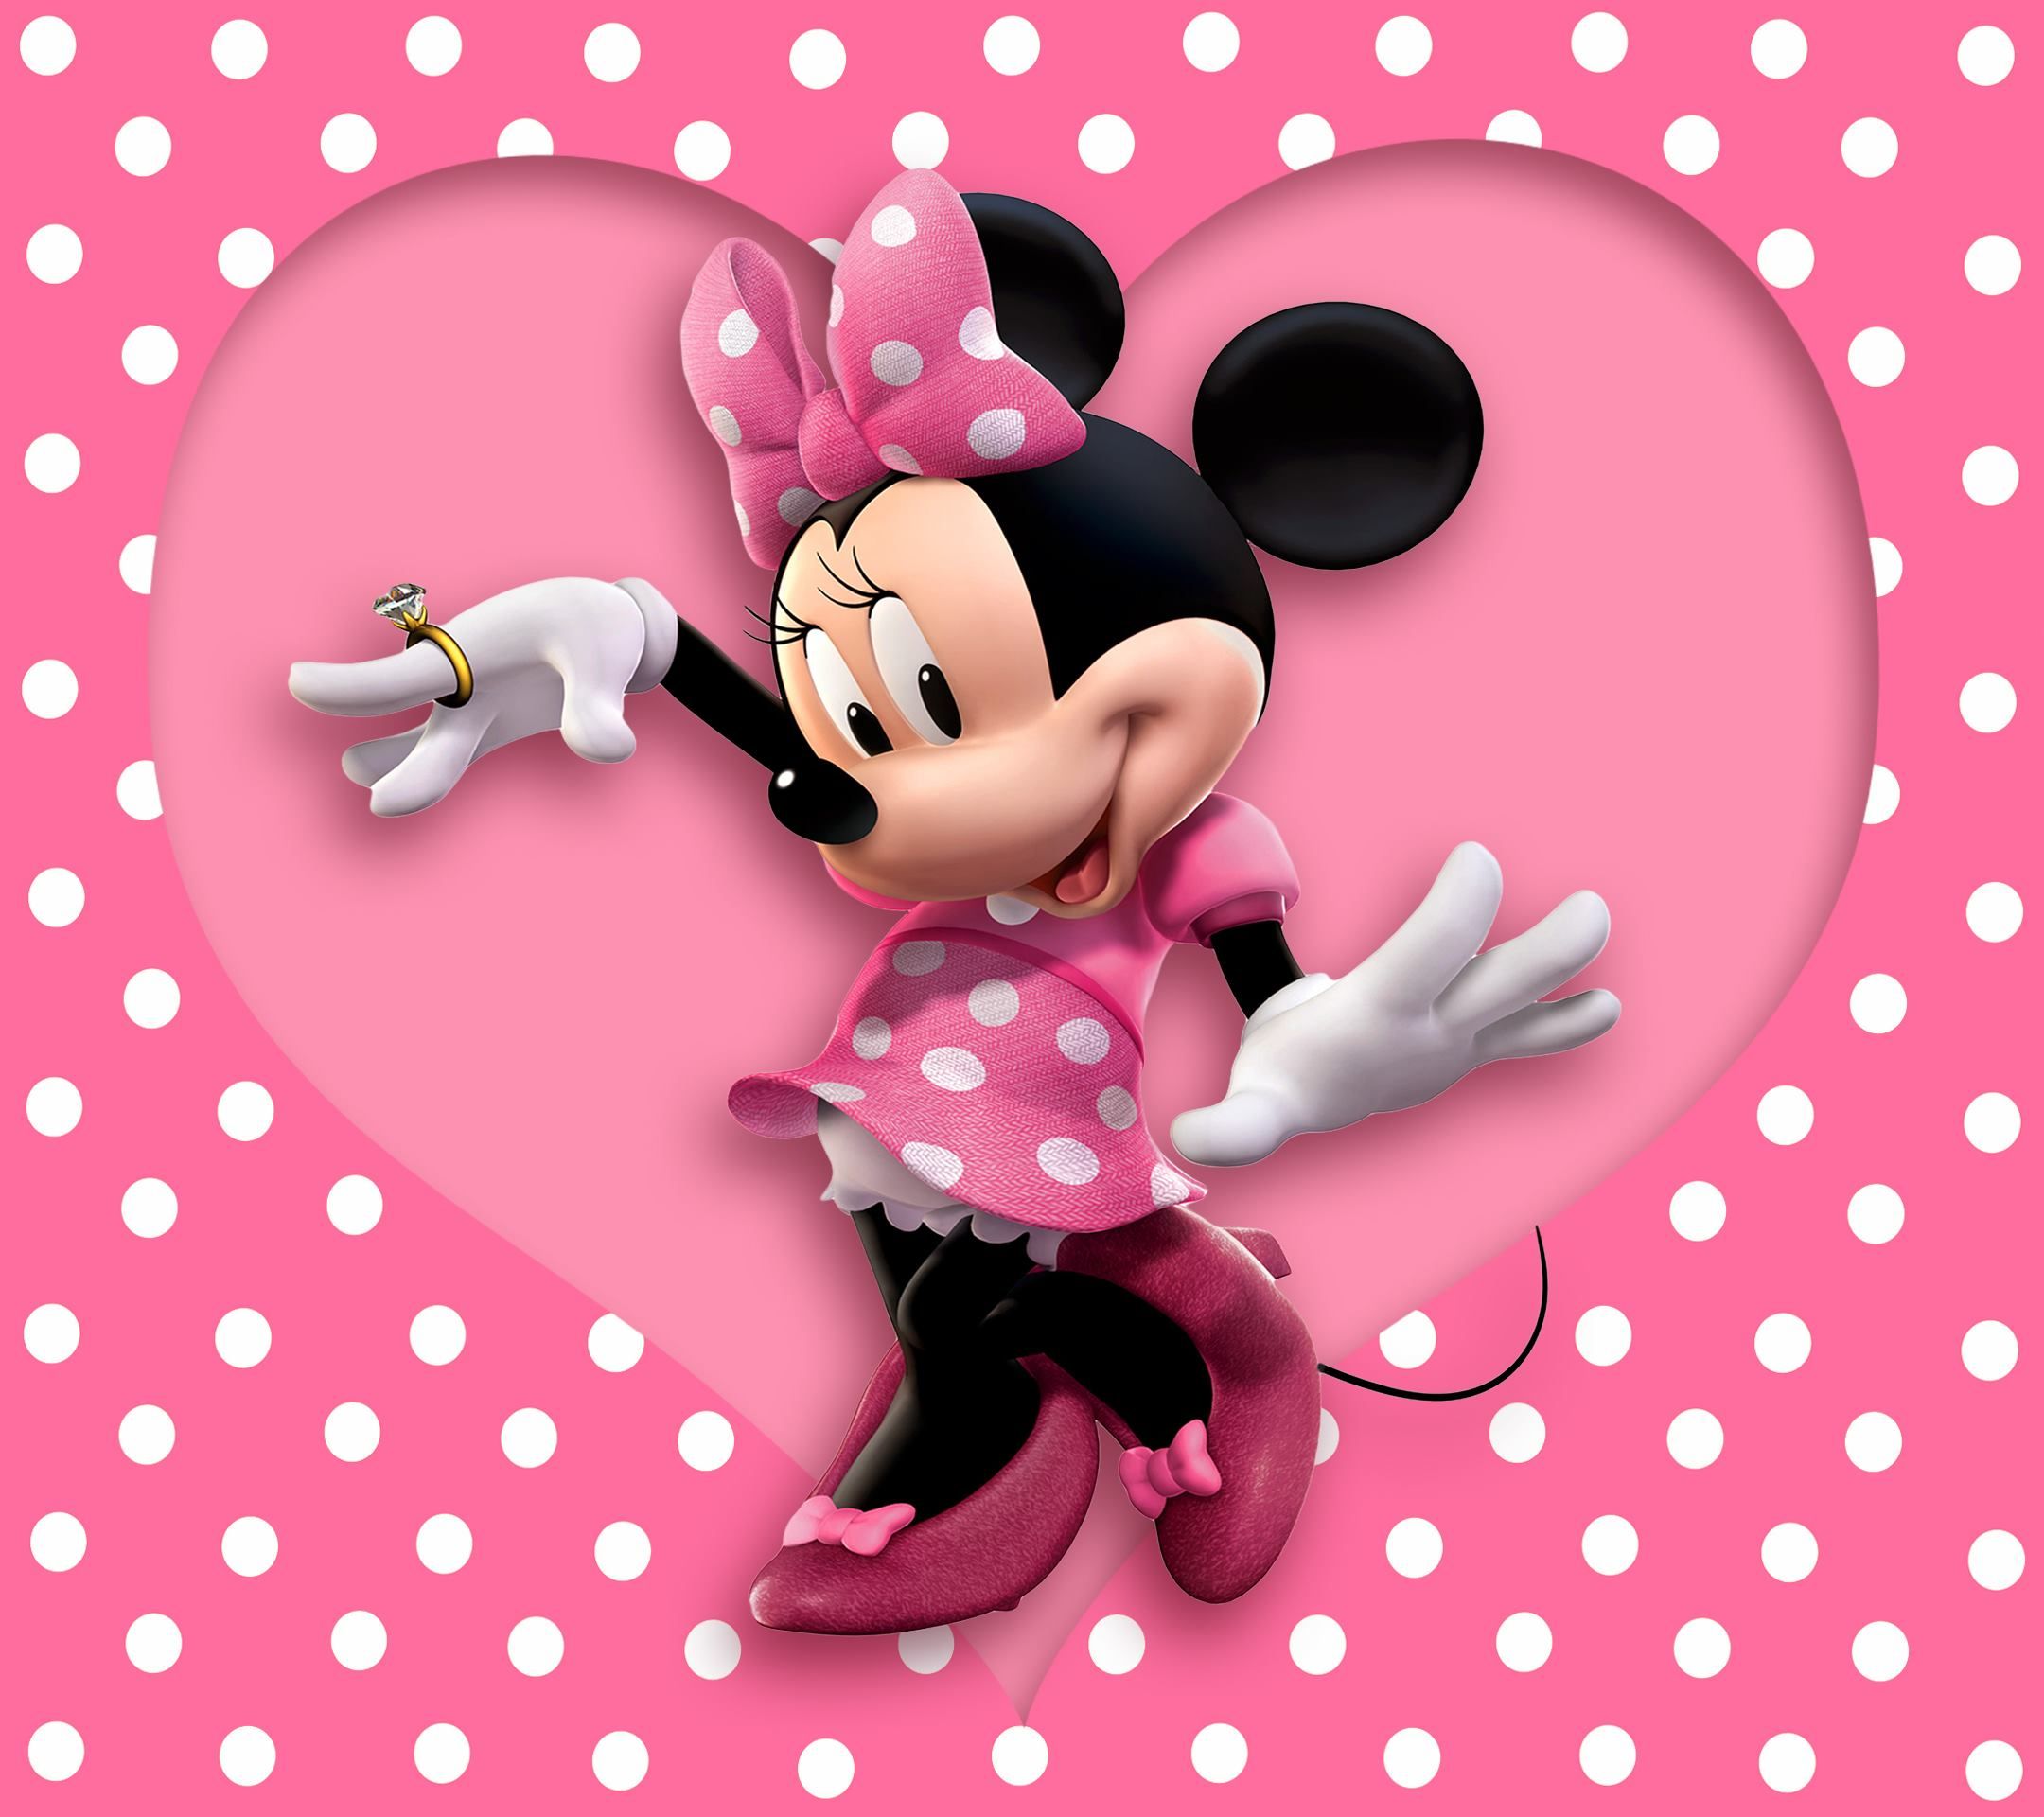 Minnie Mouse Hd Wallpapers Free Download Pixelstalk